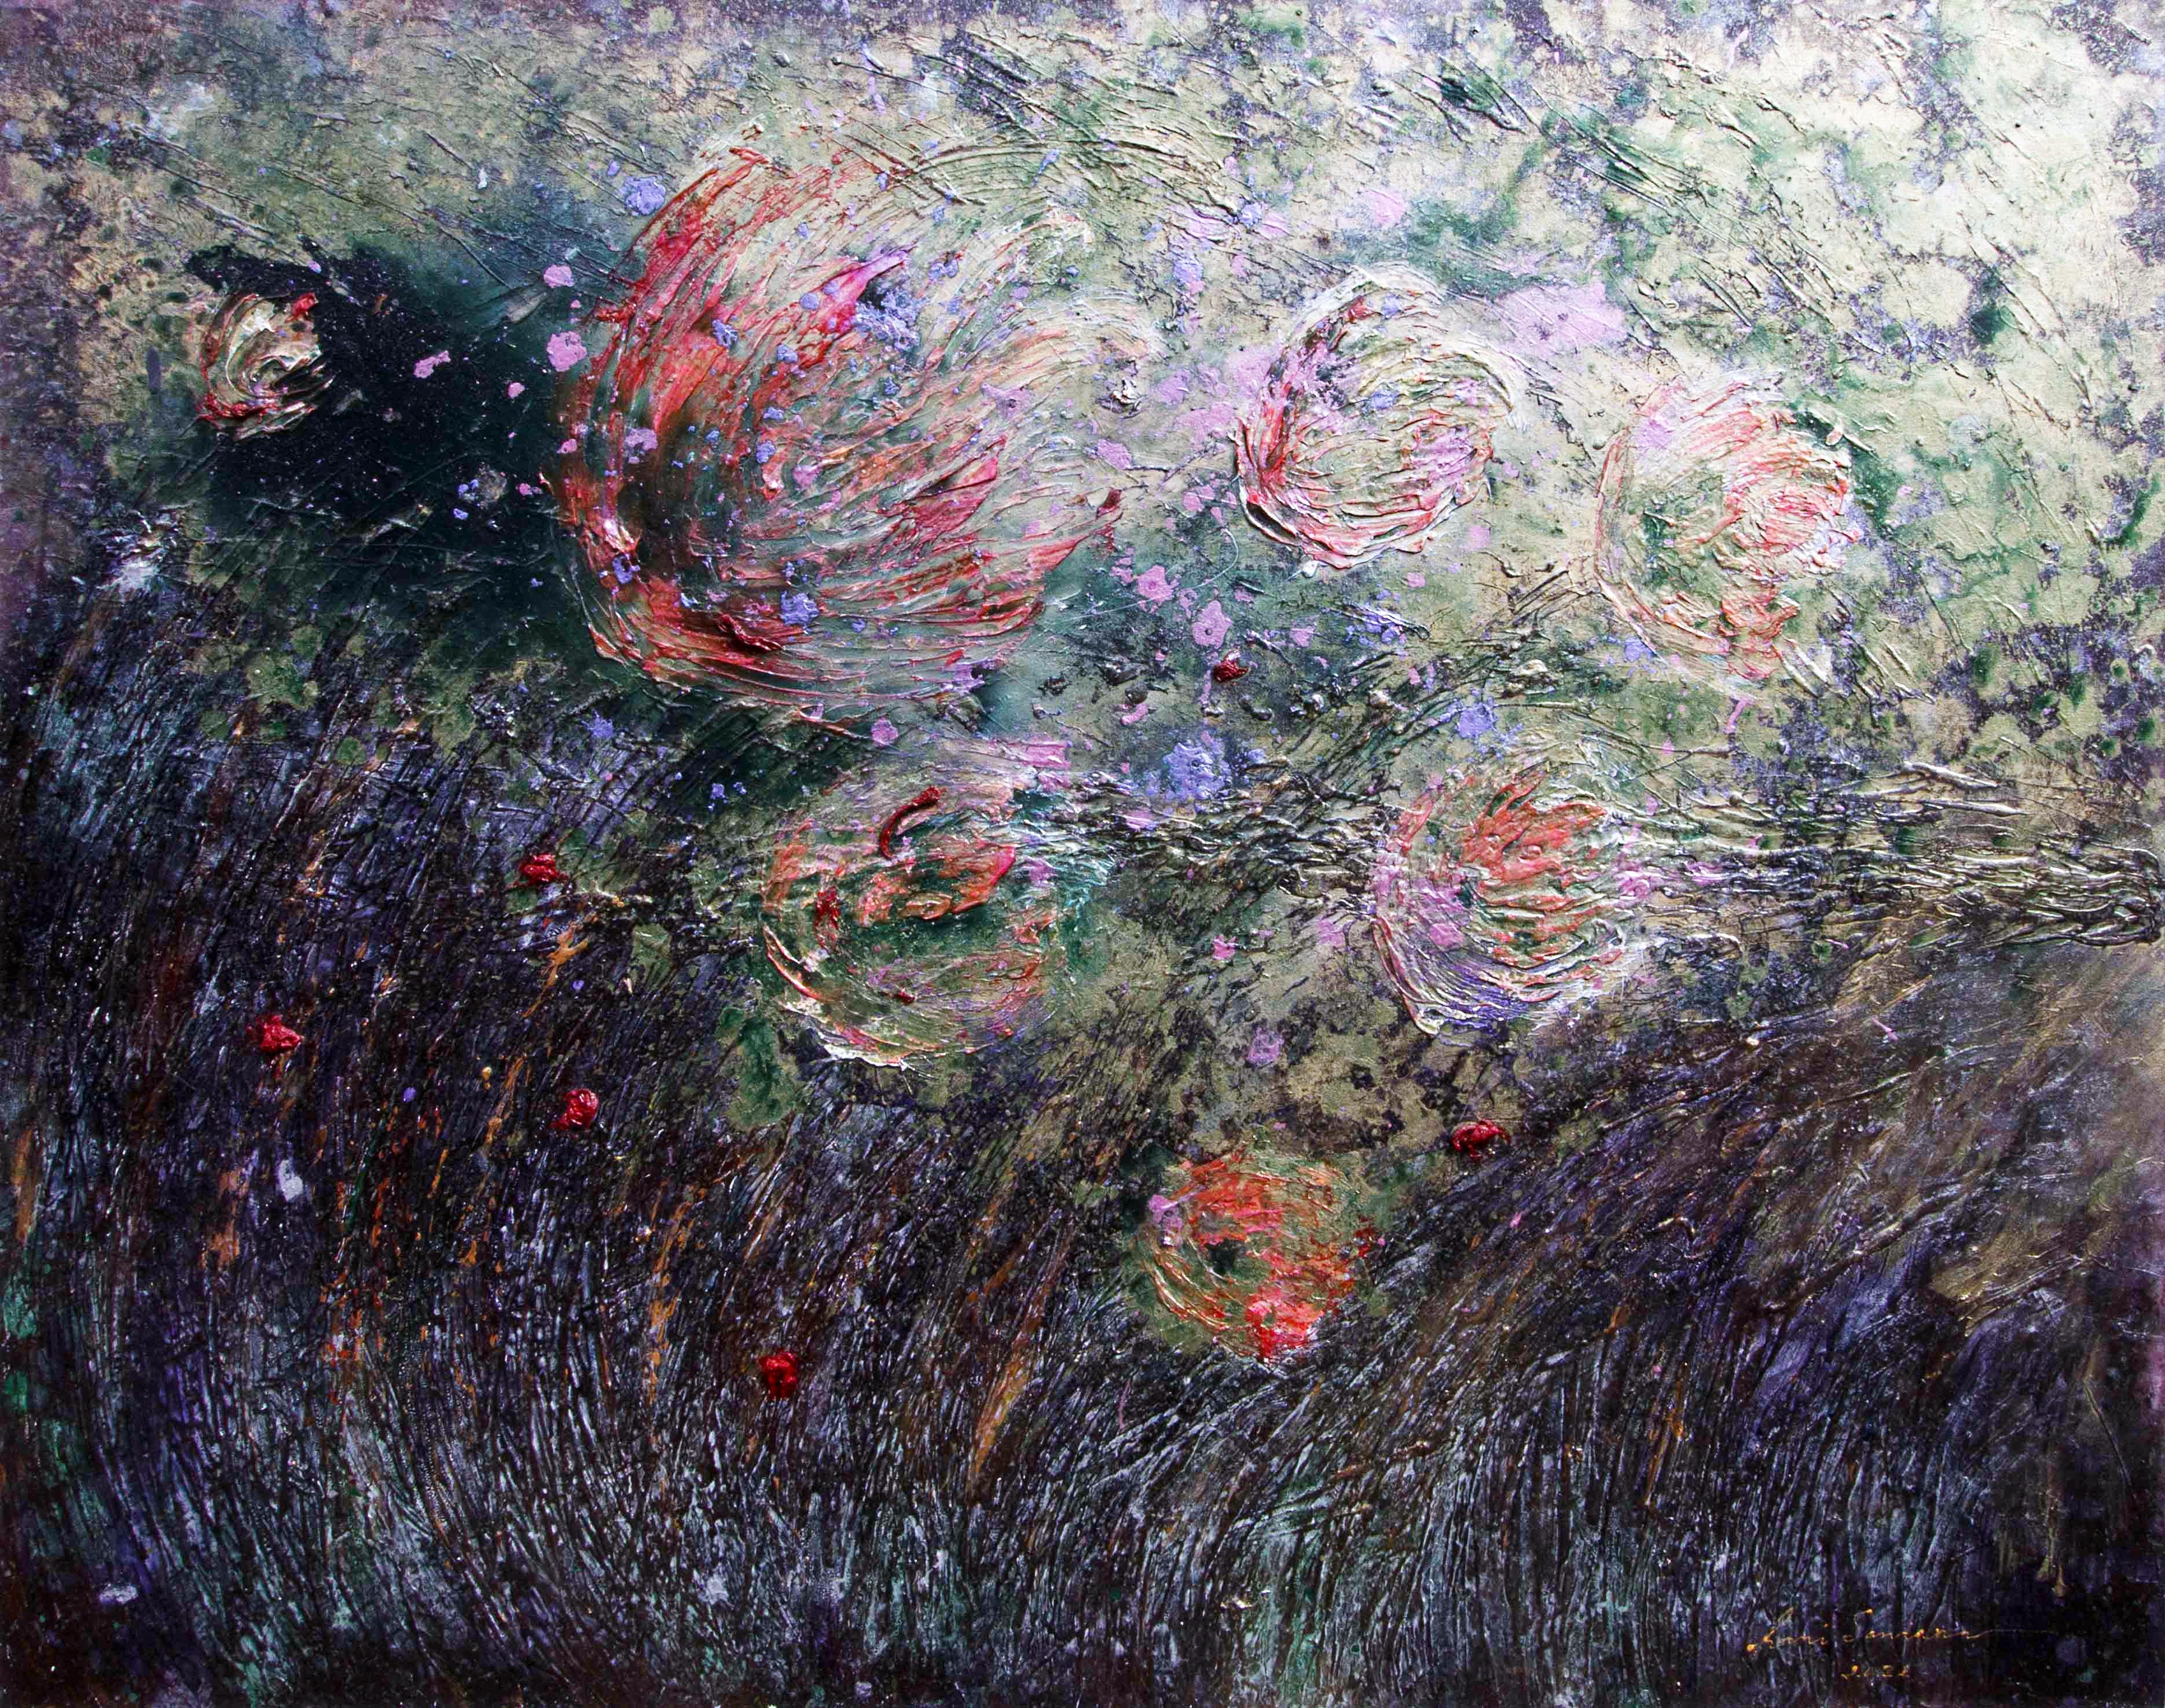 Seabed Reeds - Painting by Hani Santana